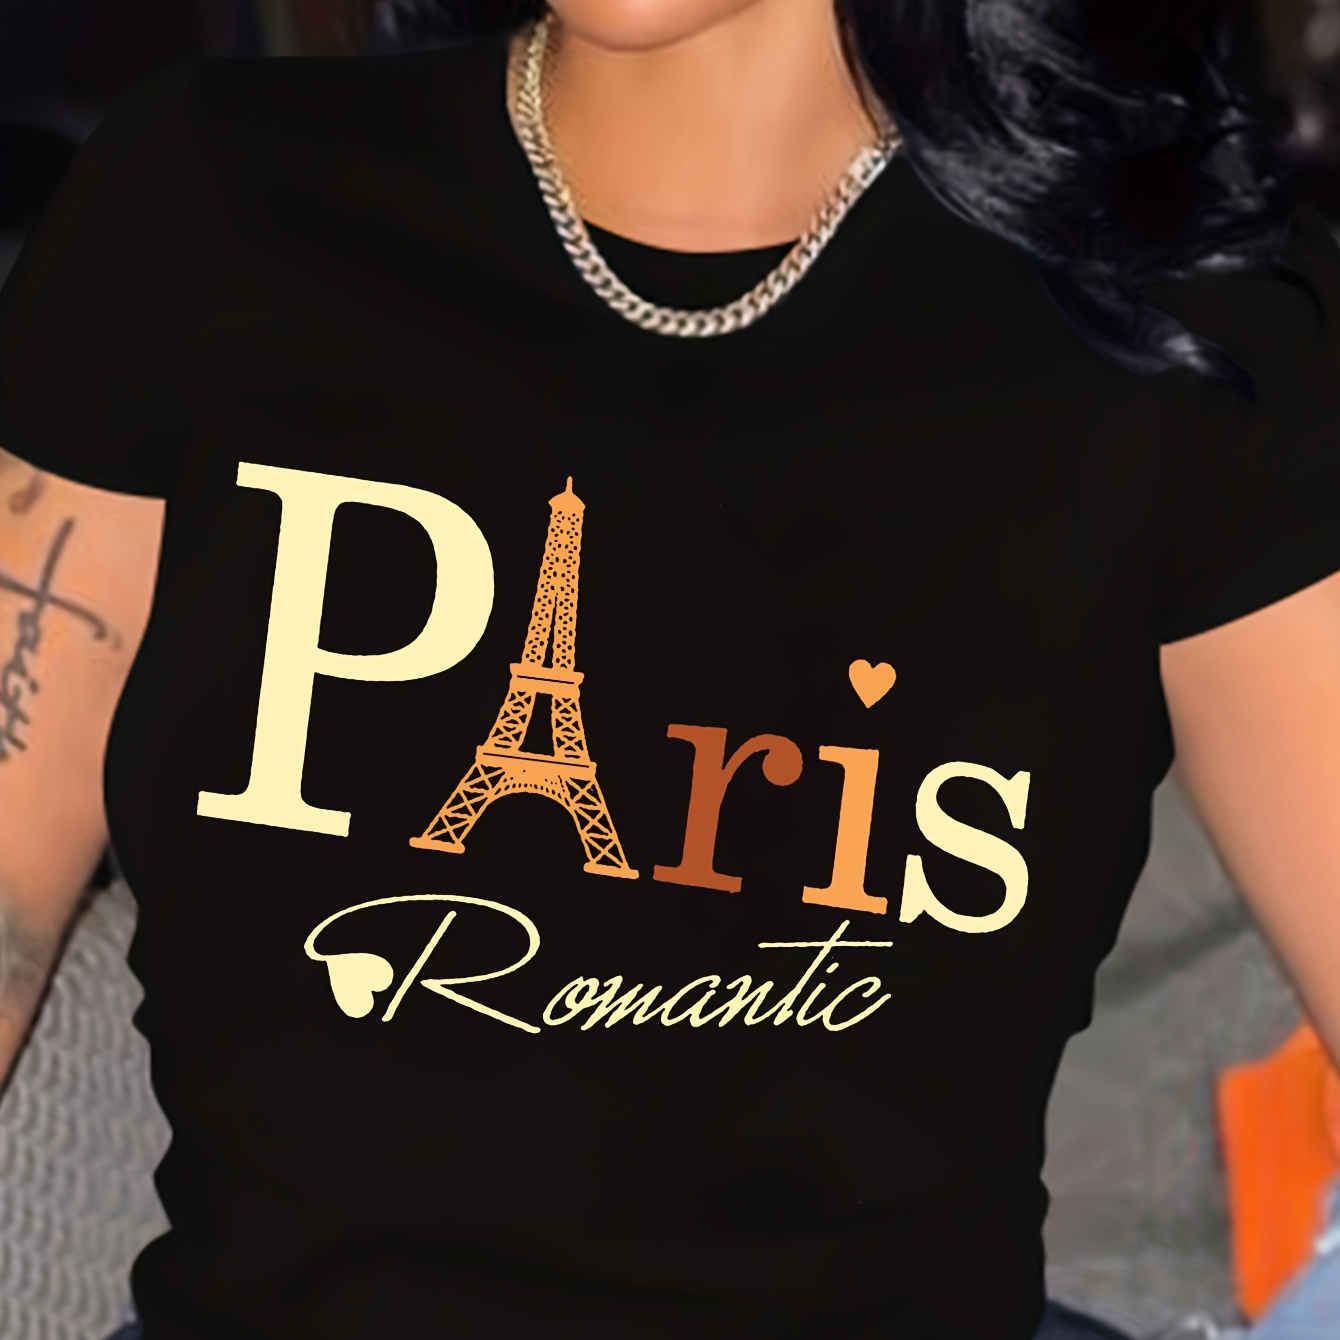 

Paris Tower & Letter Print T-shirt, Short Sleeve Crew Neck Casual Top For Summer & Spring, Women's Clothing